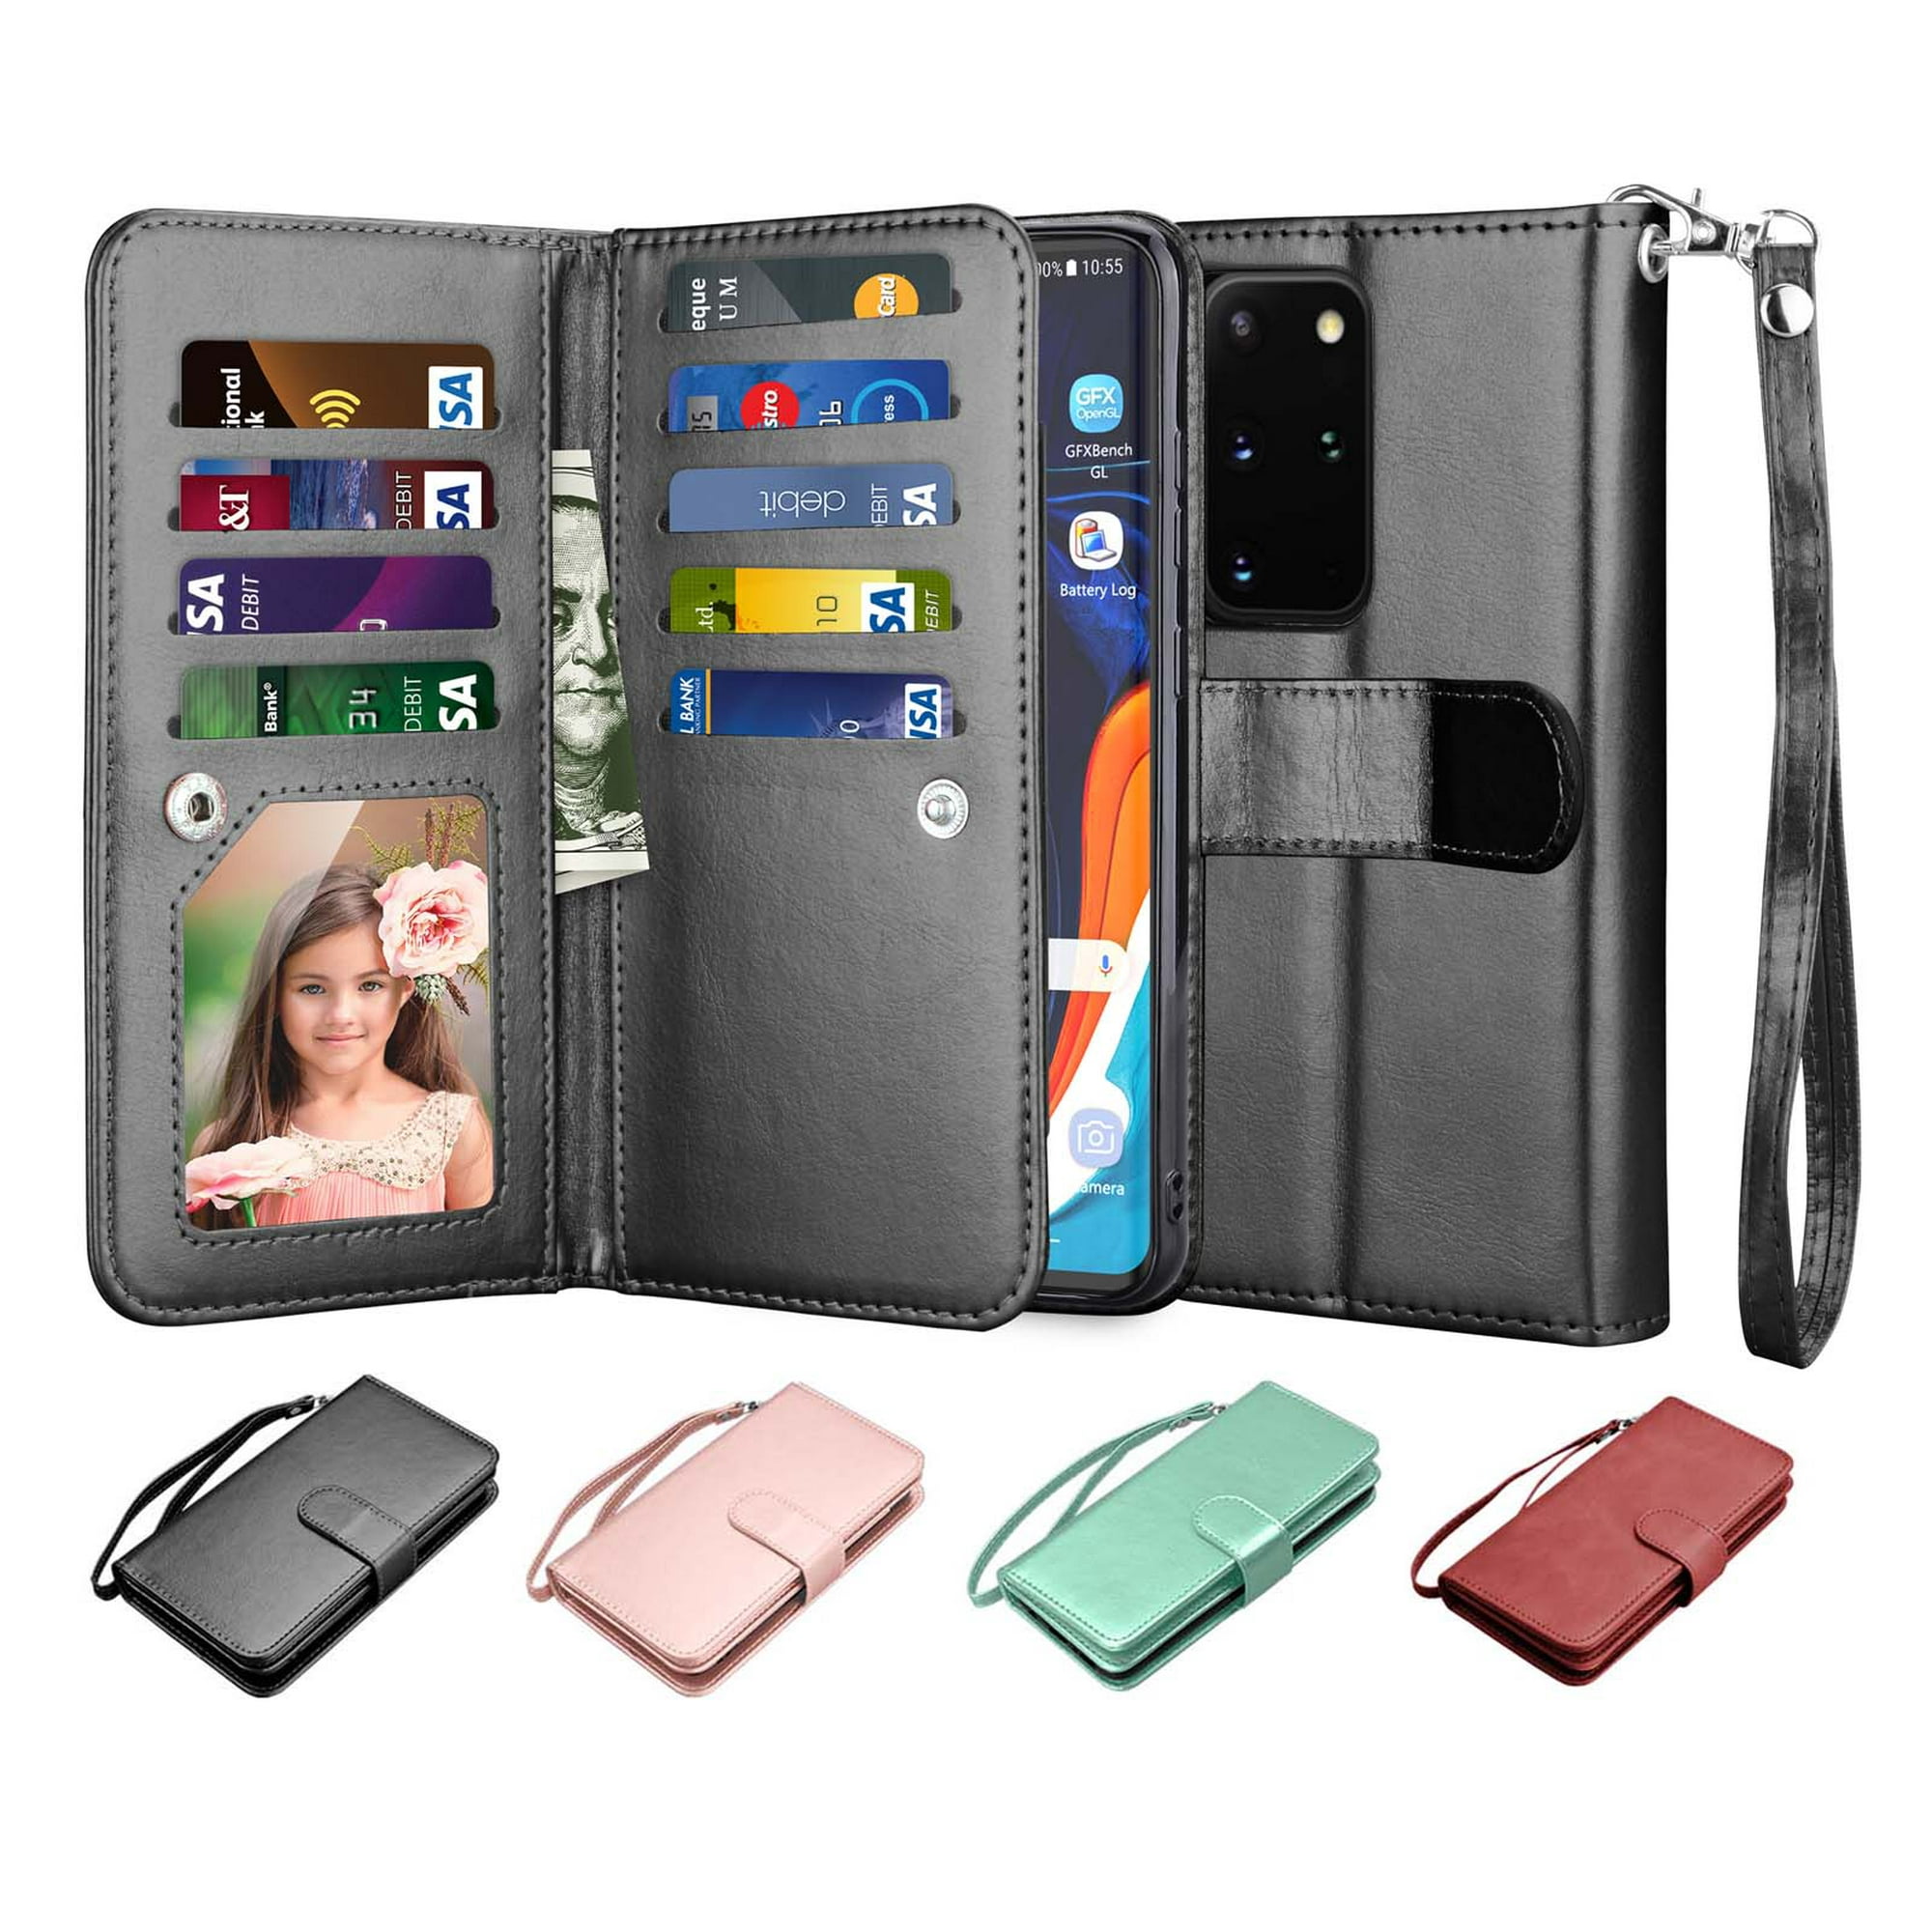 Samsung Galaxy S20 Leather Wallet Case S20 case S20 leather case leather  S20 case - IDTEXAS- 0S20